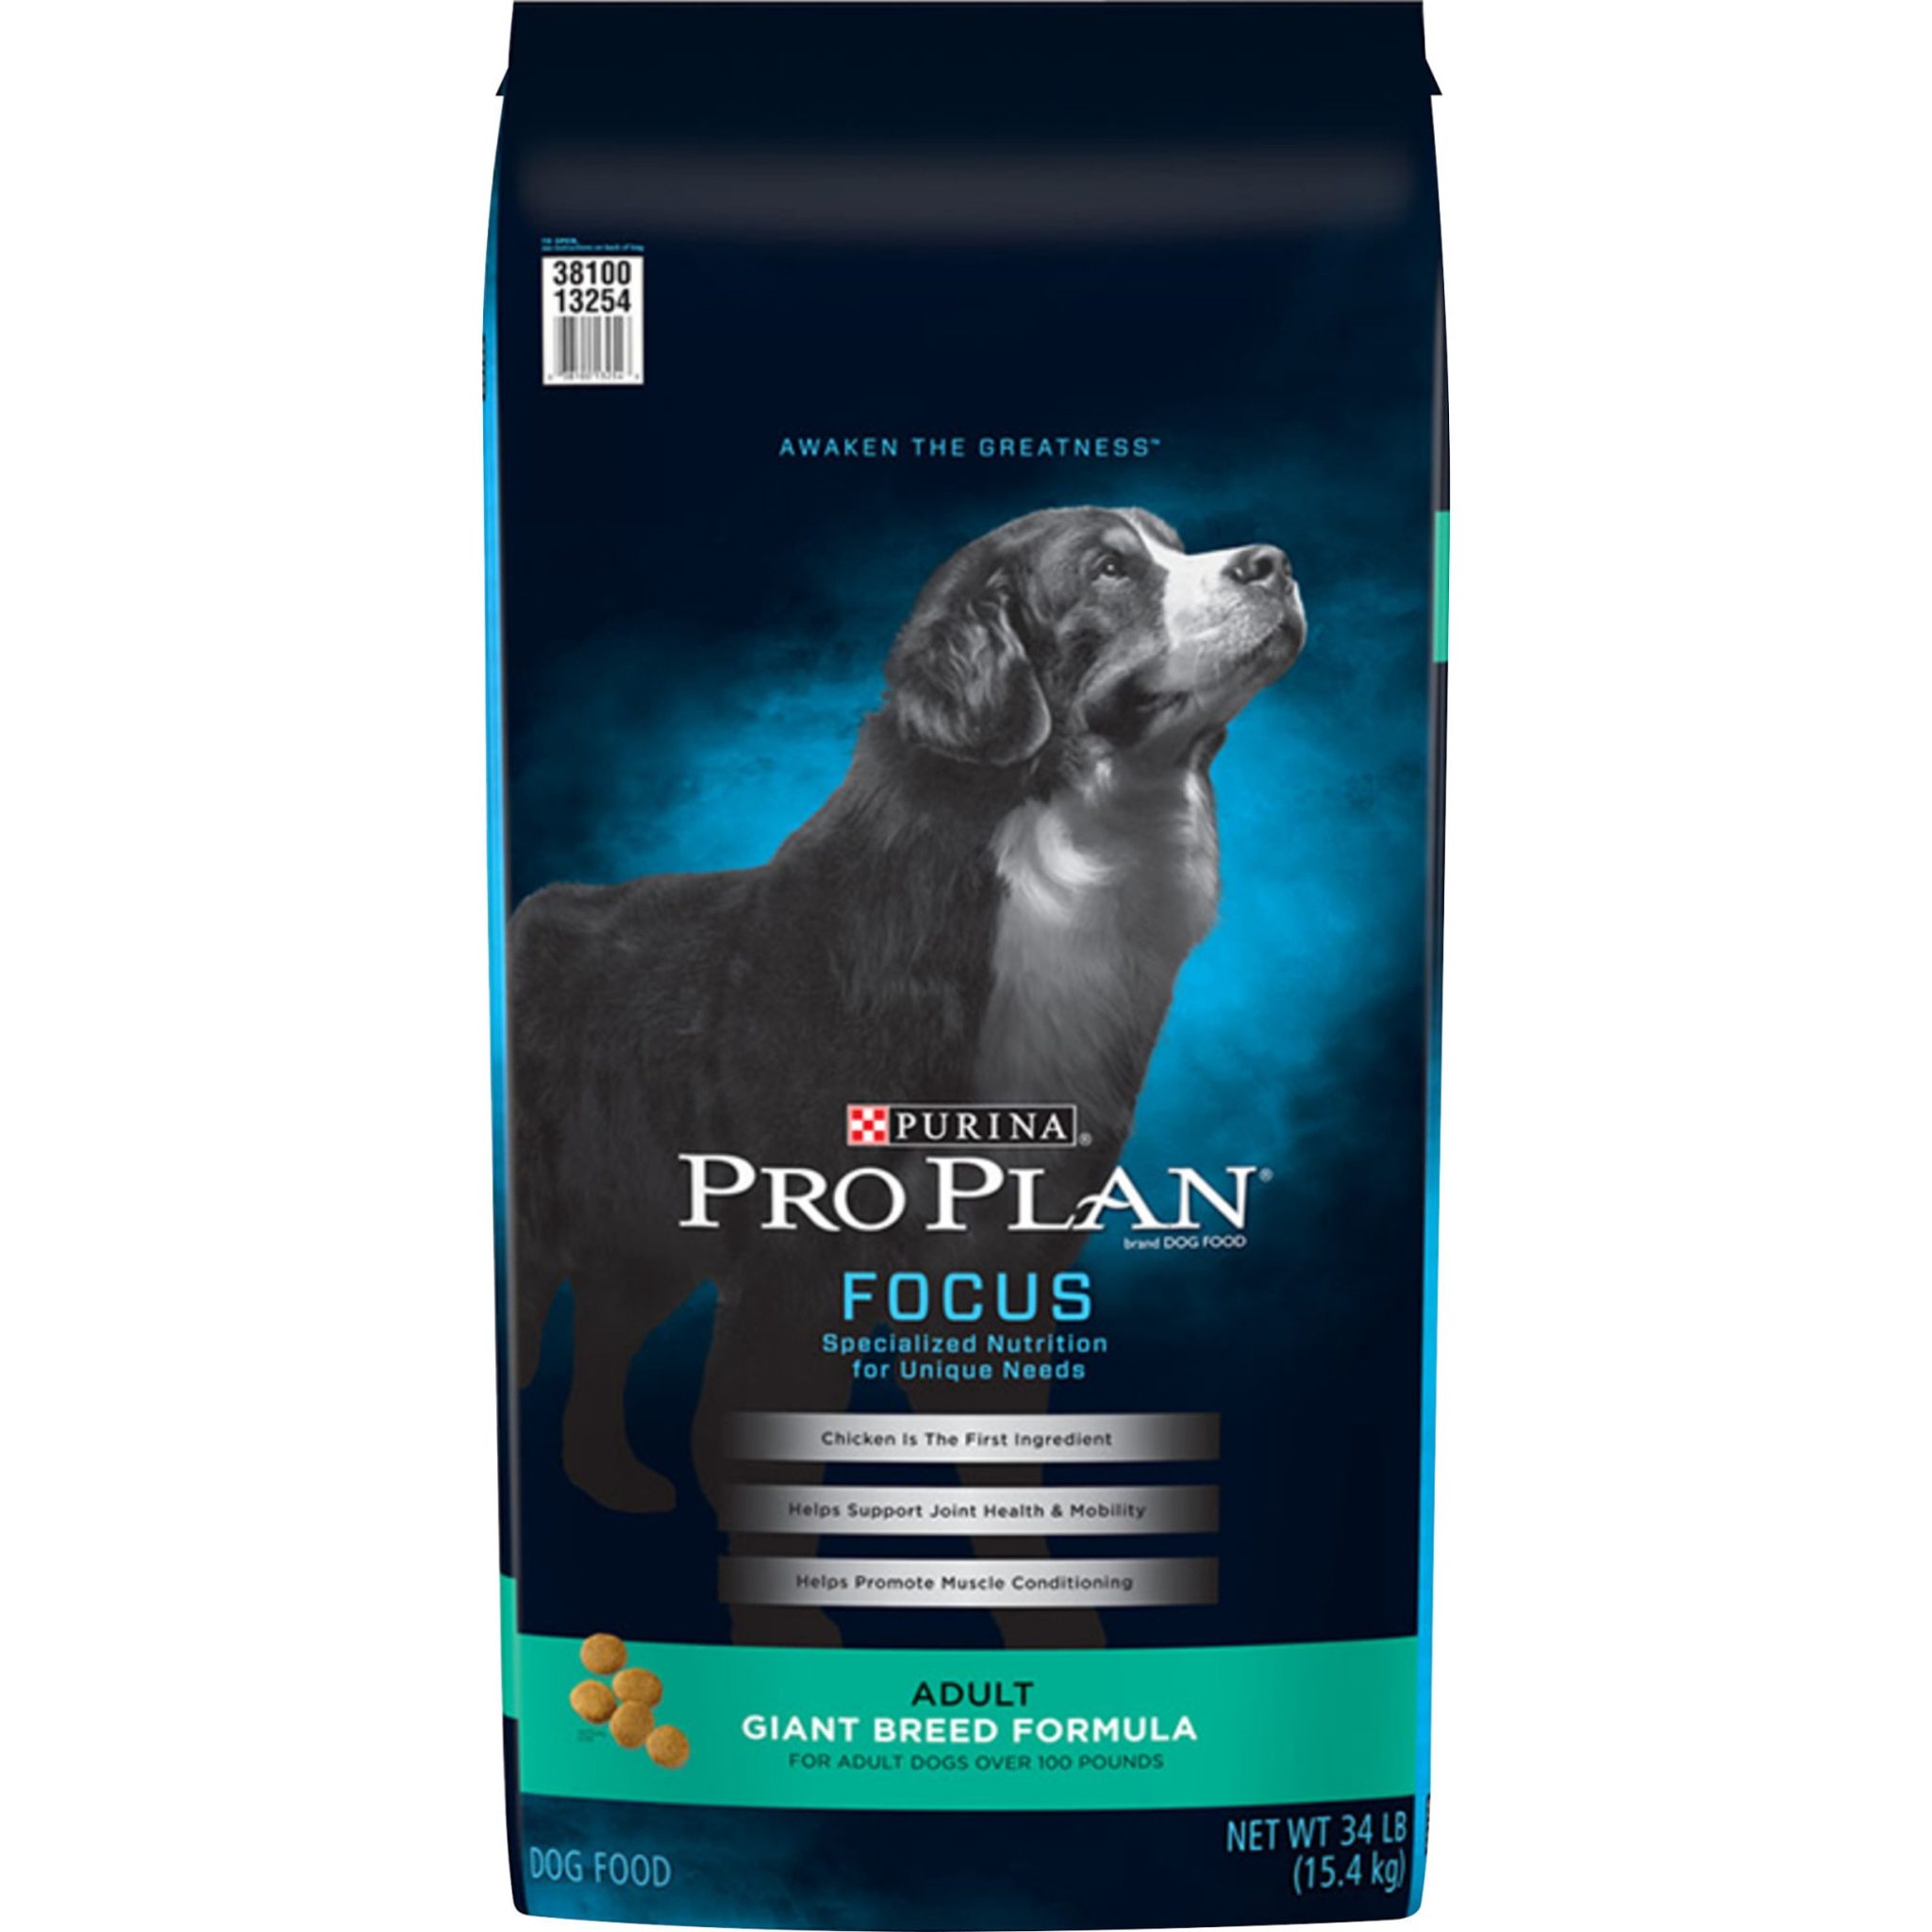 Purina Pro Plan Focus High Protein Giant Breed Formula Dry Dog Food Pet Food Ratings